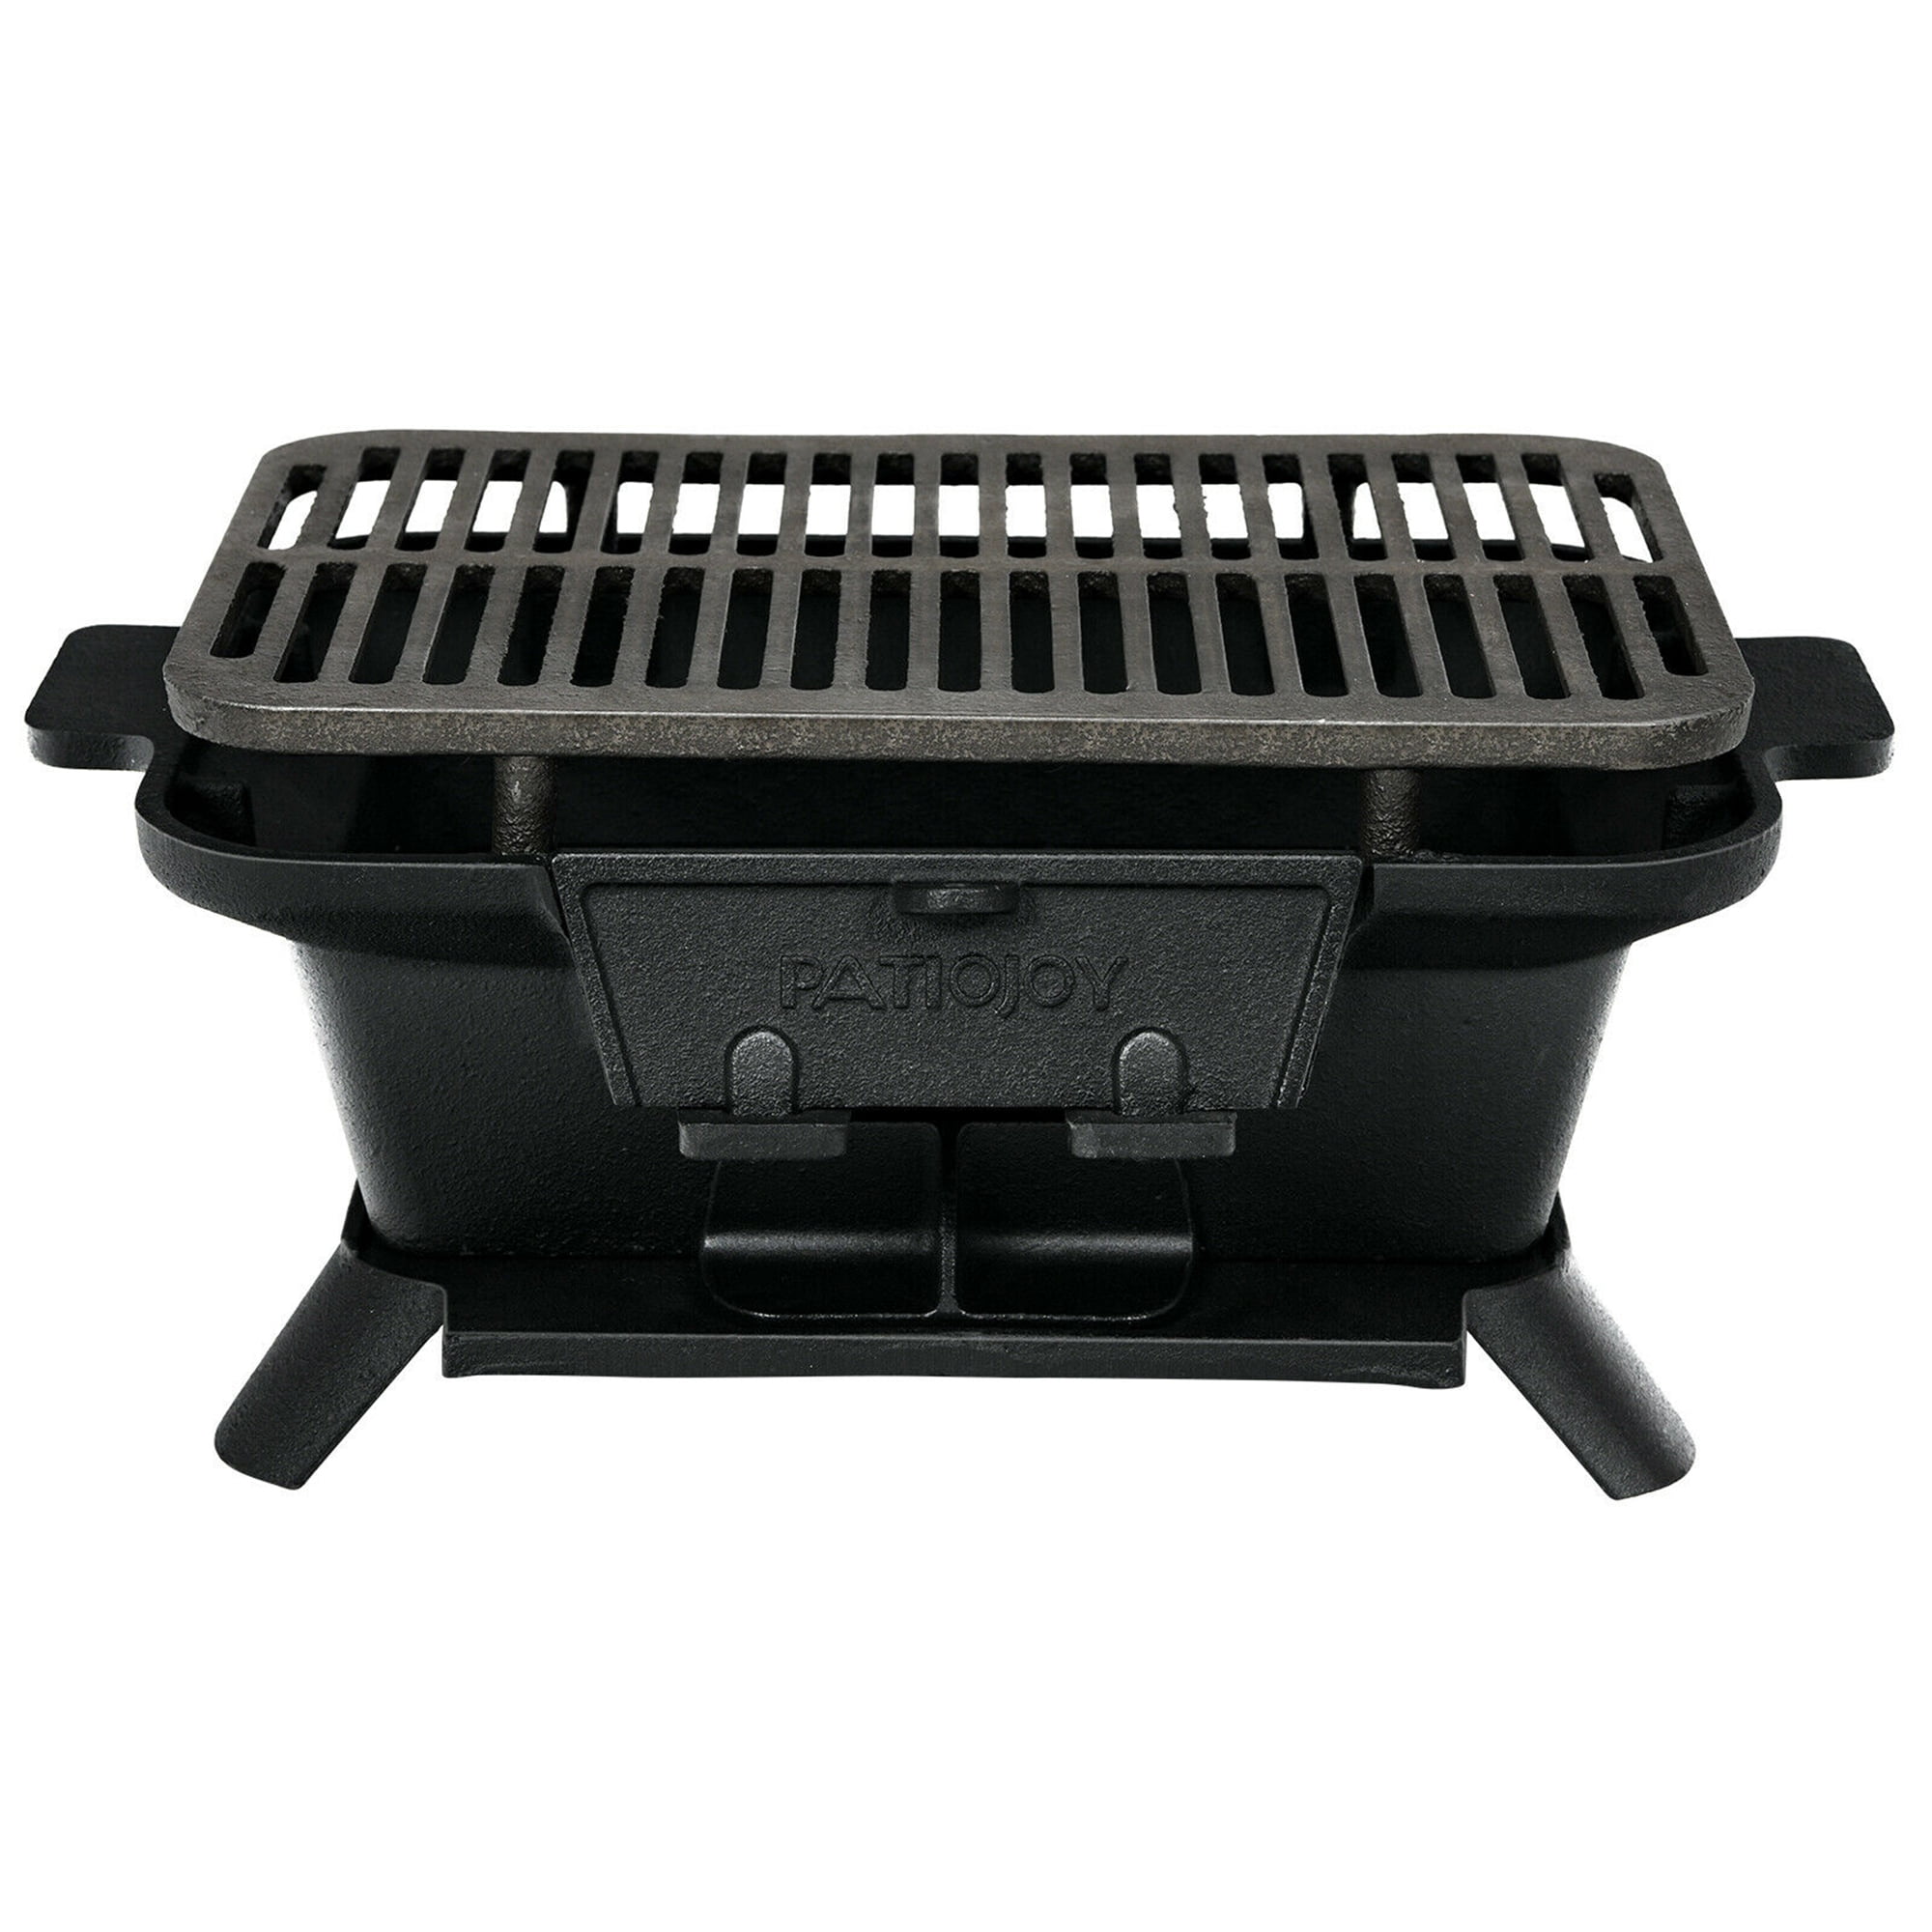 BBQ-TORO Cast Iron Barbecue with Cooking Grill | 50 x 25 x 23 cm | Hibachi  Style Charcoal Camping Grill